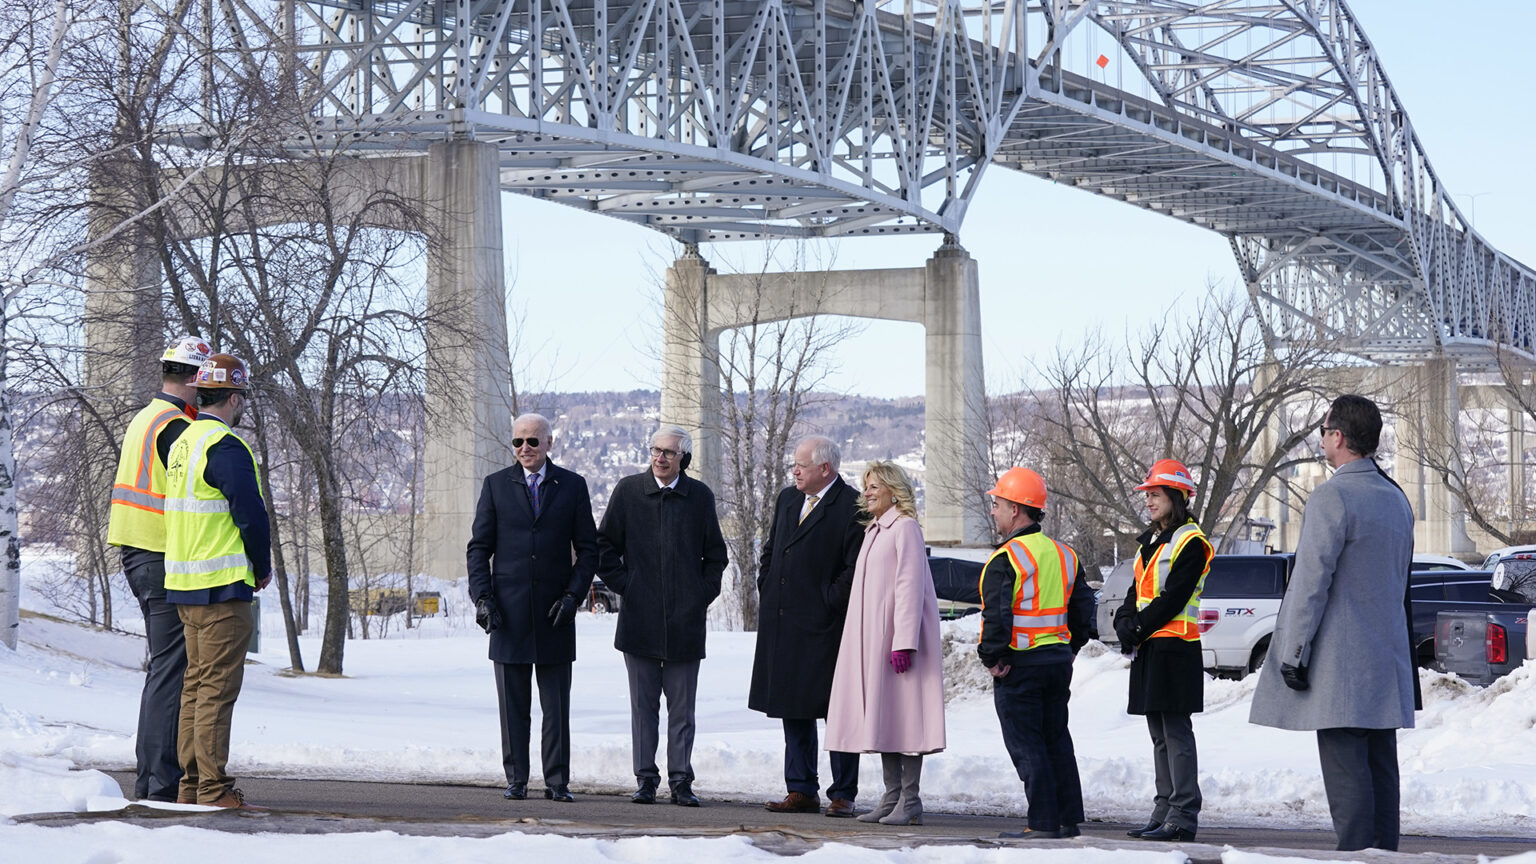 Joe Biden, Tony Evers, Tim Walz and Jill Biden stand alongside two people wearing safety vests and helmets, with three other people facing them on a sidewalk in a snow-covered area with leafless trees and parked vehicles at the base of a bridge with concrete pillars and a steel girder superstructure, with foothills on the horizon.